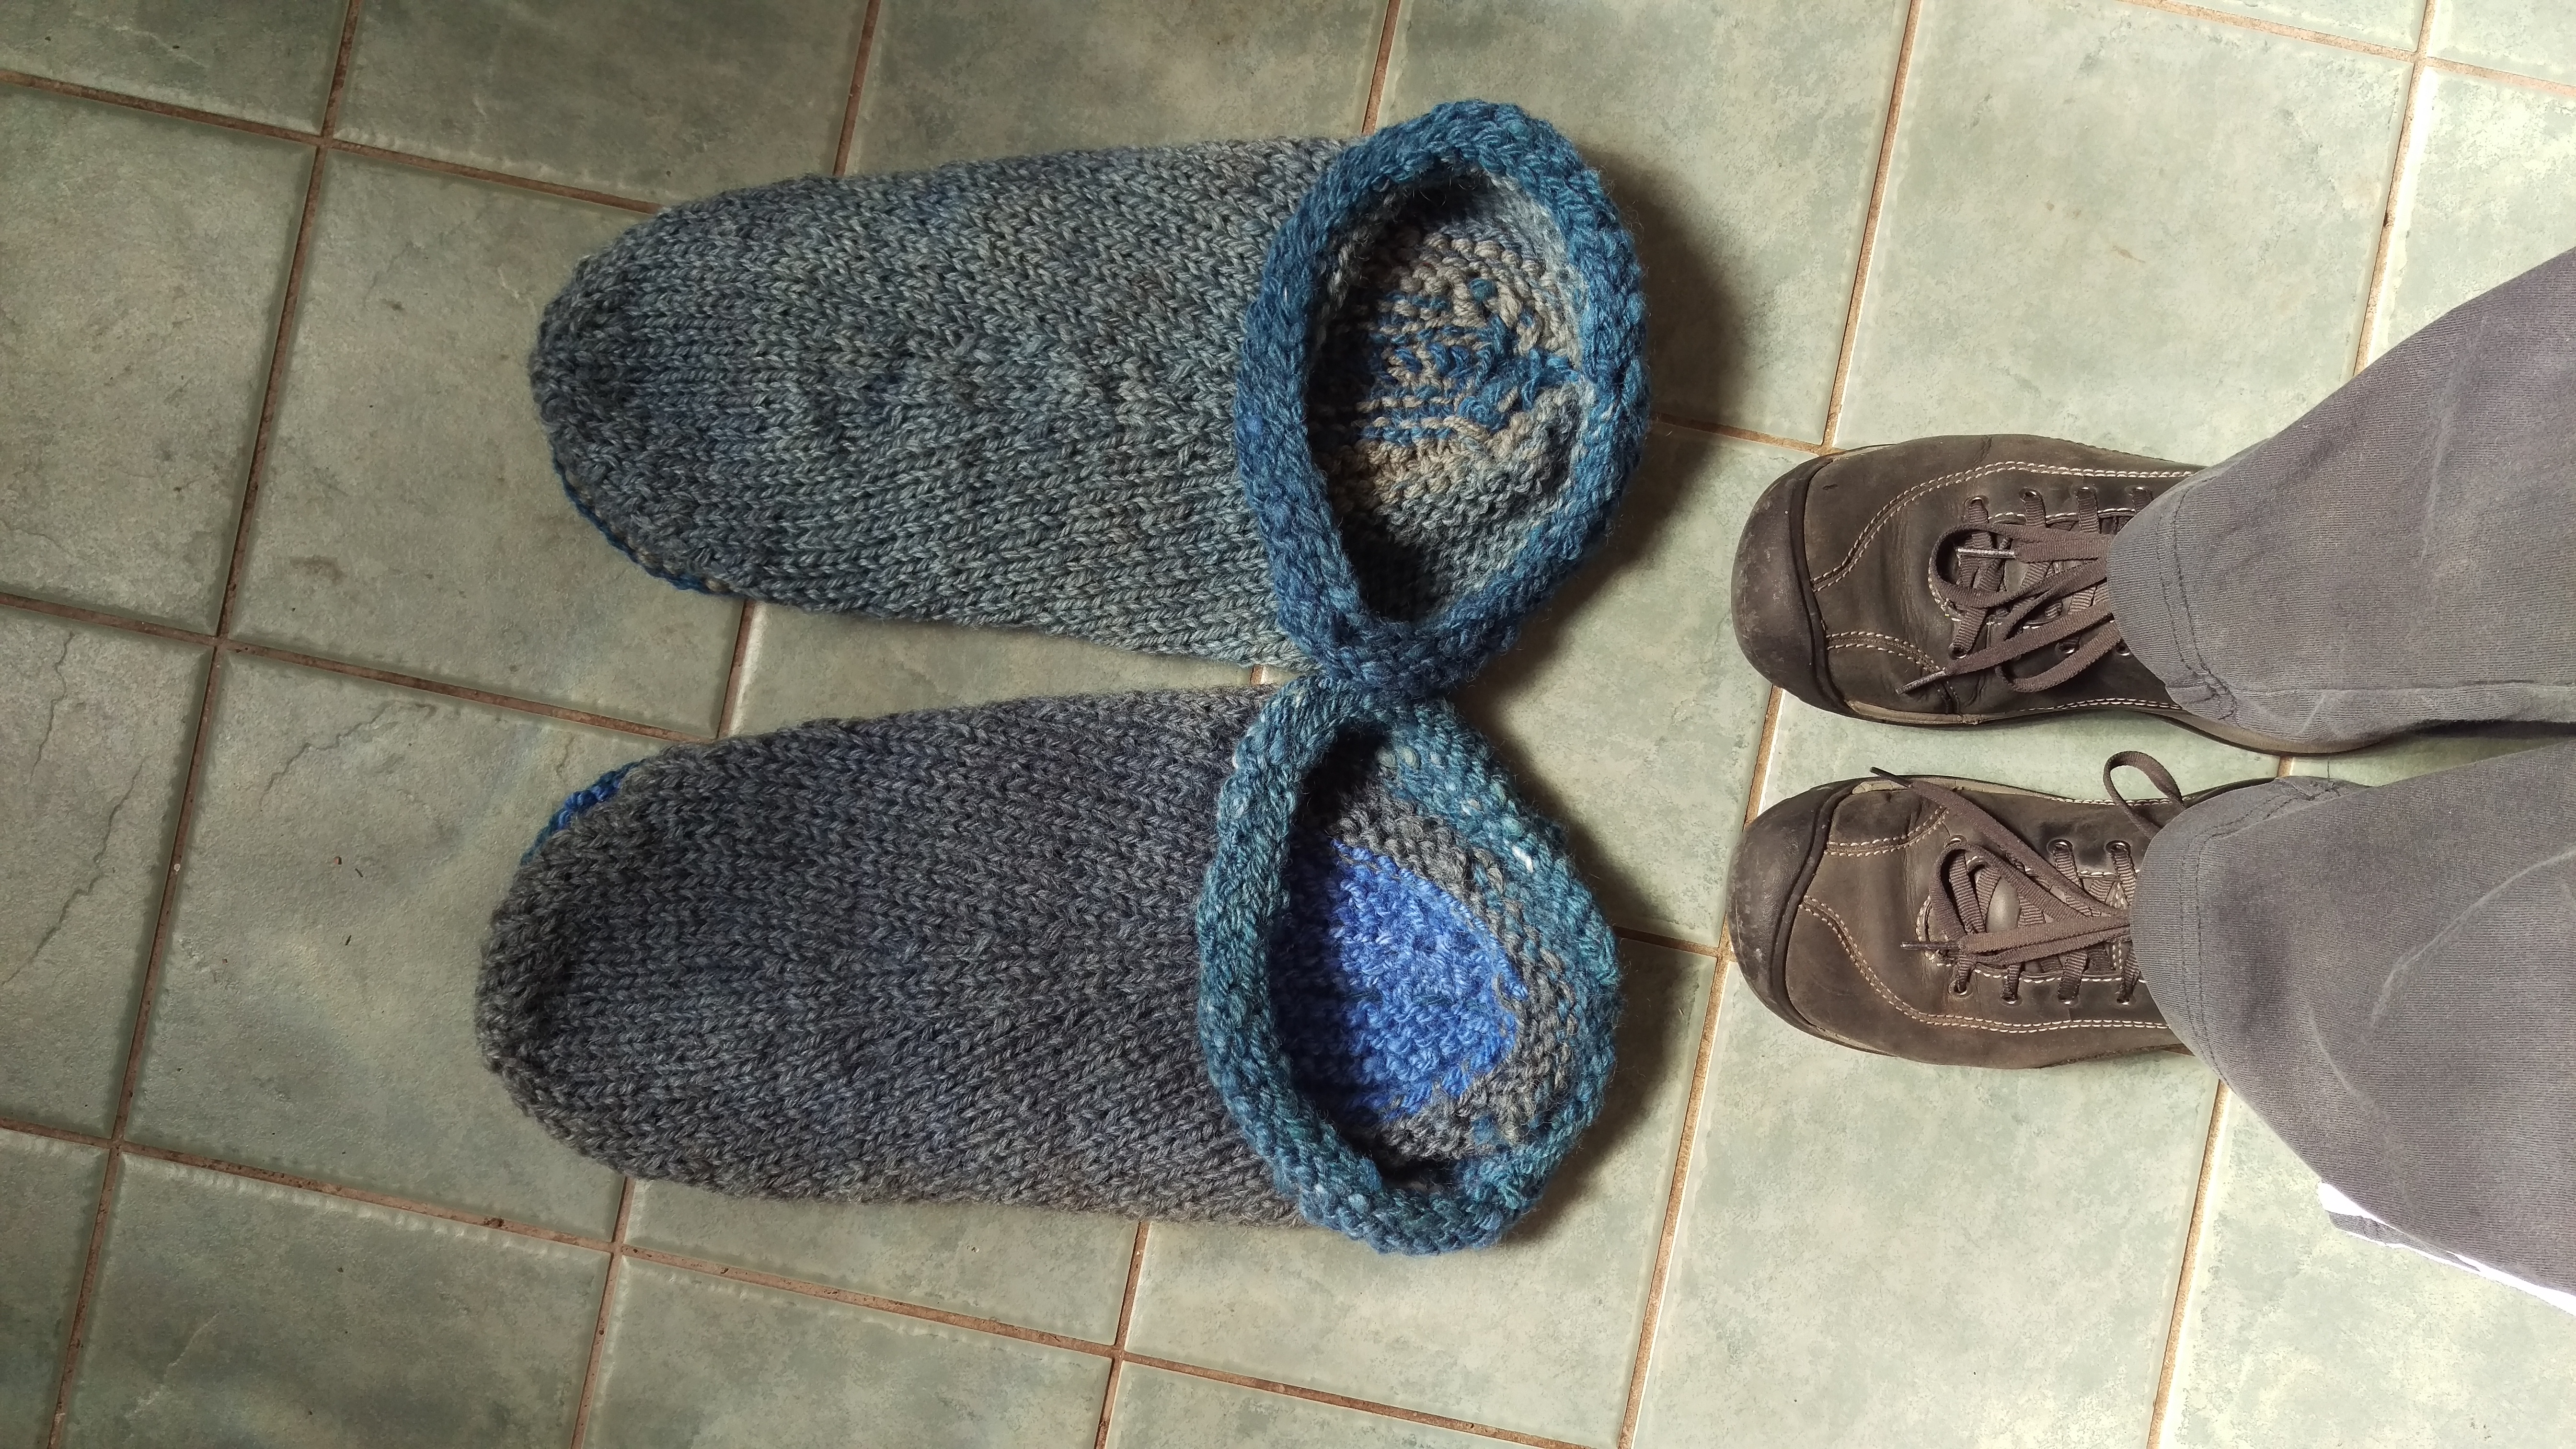 Very large knit slippers prior to felting, with much smaller shoes beside them.